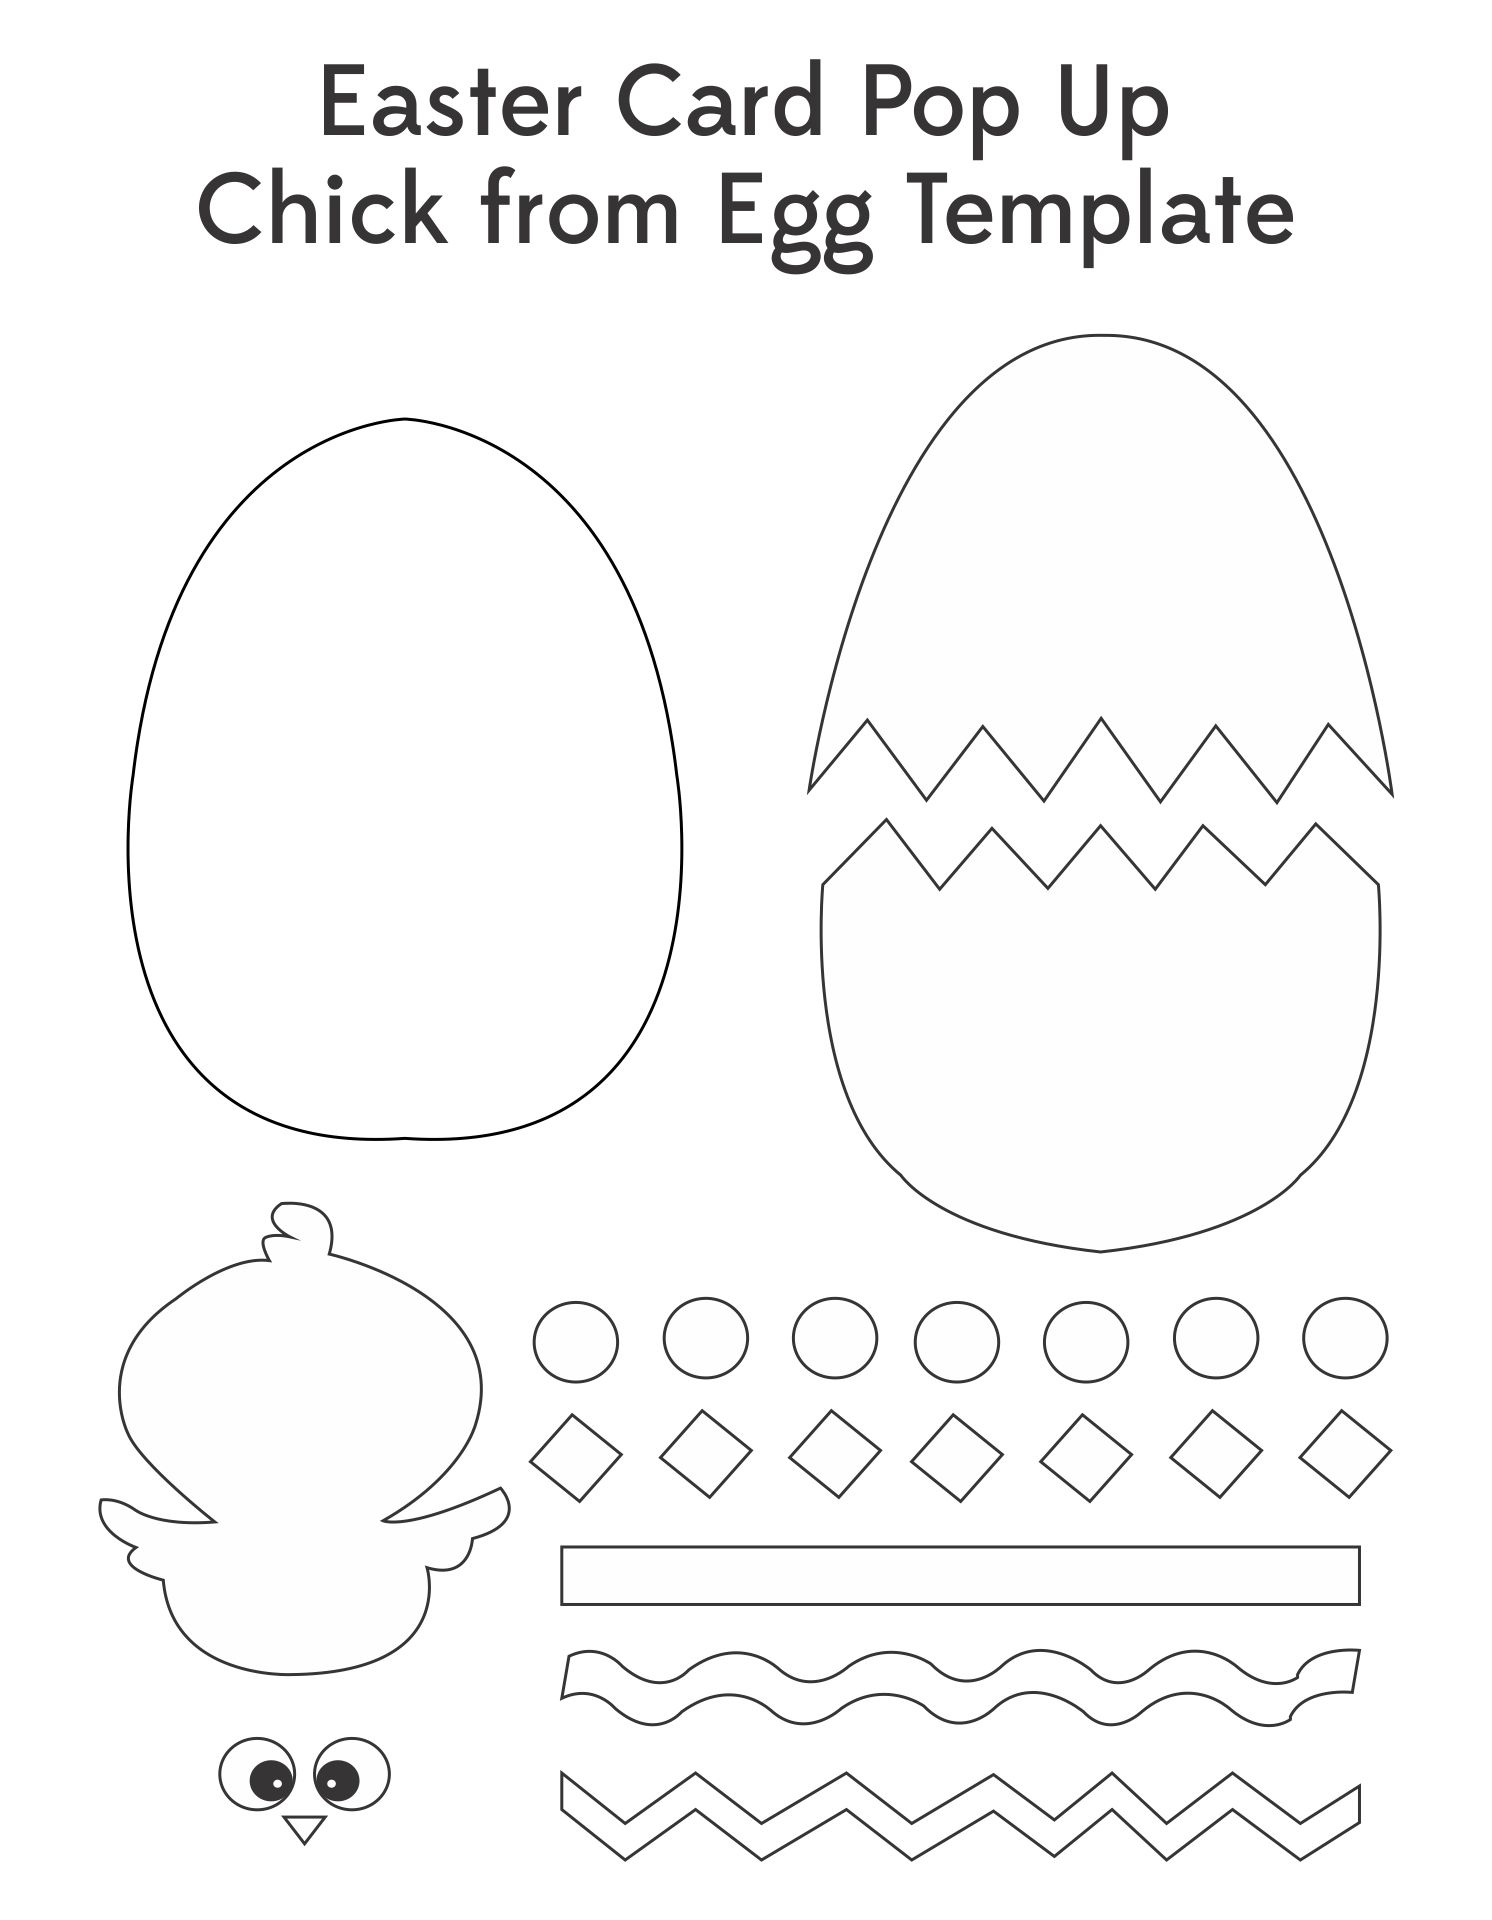 Printable Easter Card Pop Up Chick From Egg Template